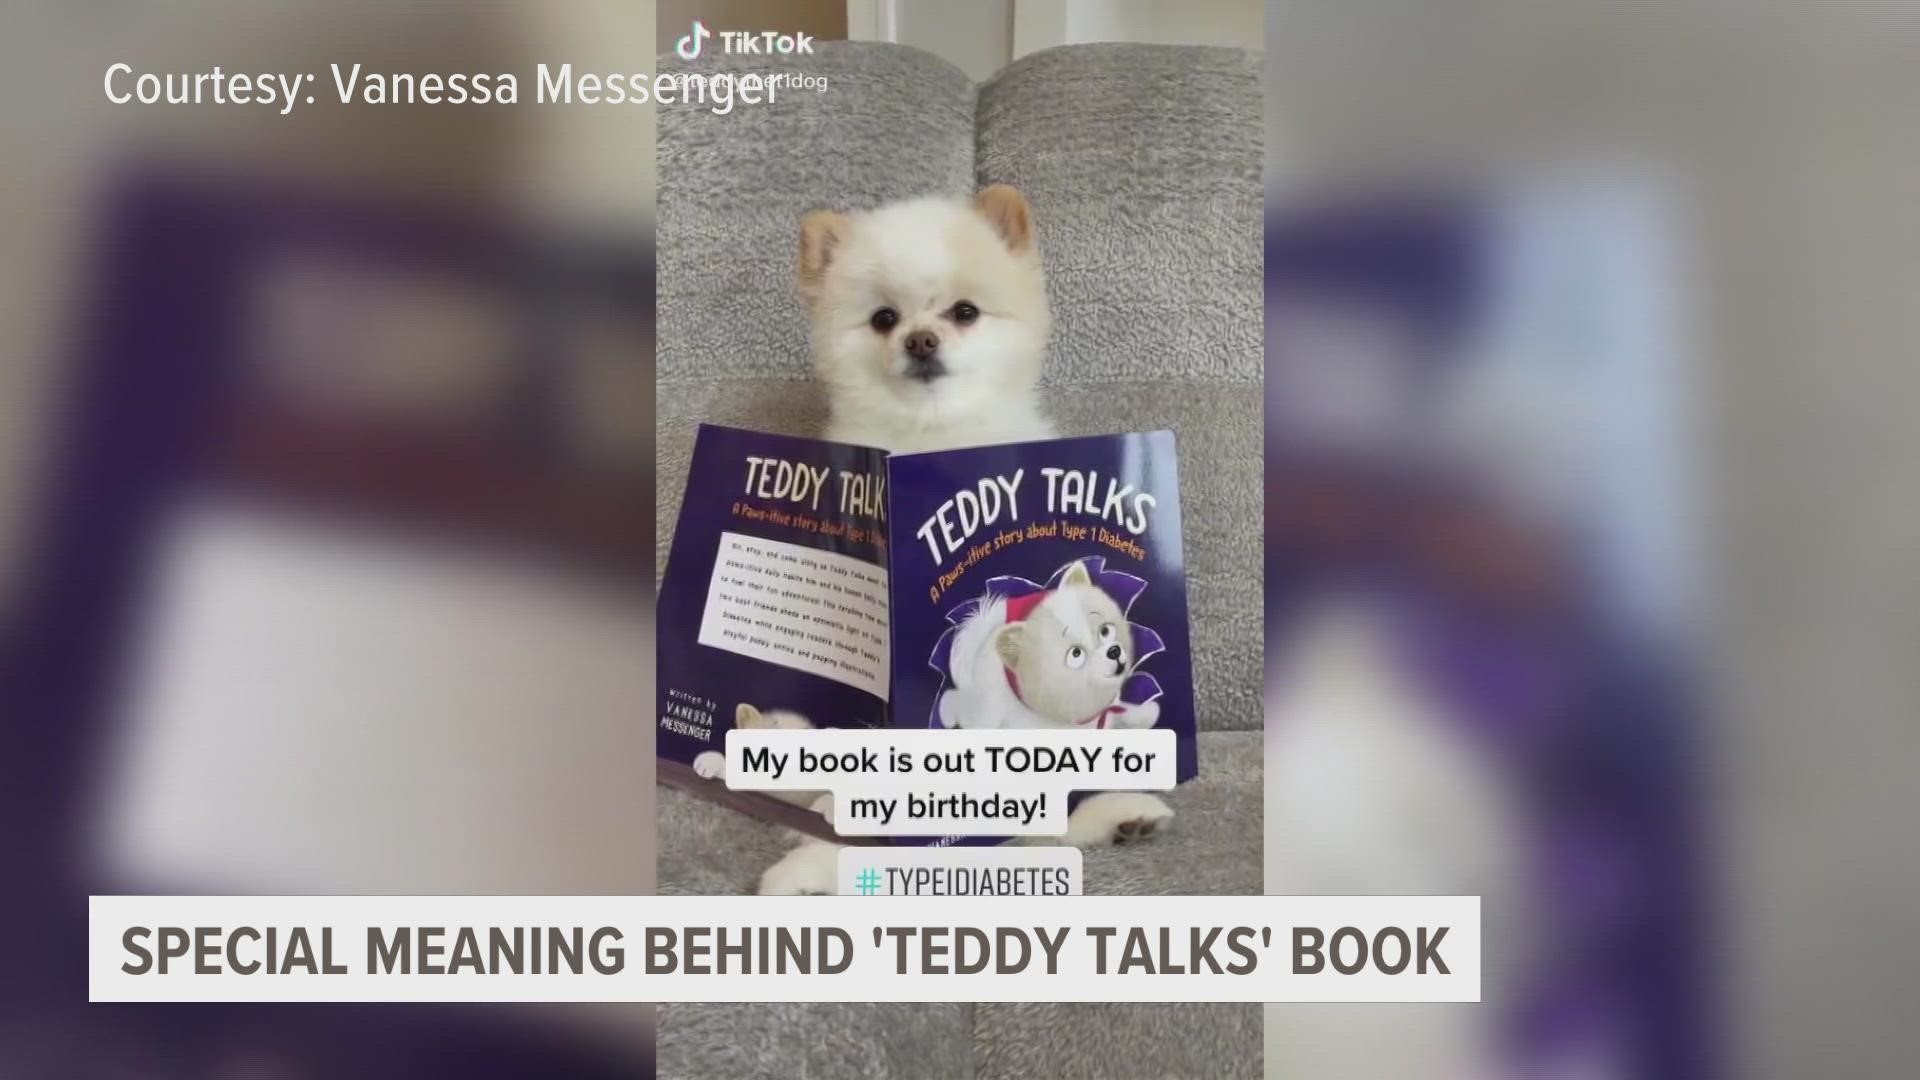 A West Michigan woman used the pandemic and her dog to fulfill a dream. She wrote a children's book that's now a best-seller.